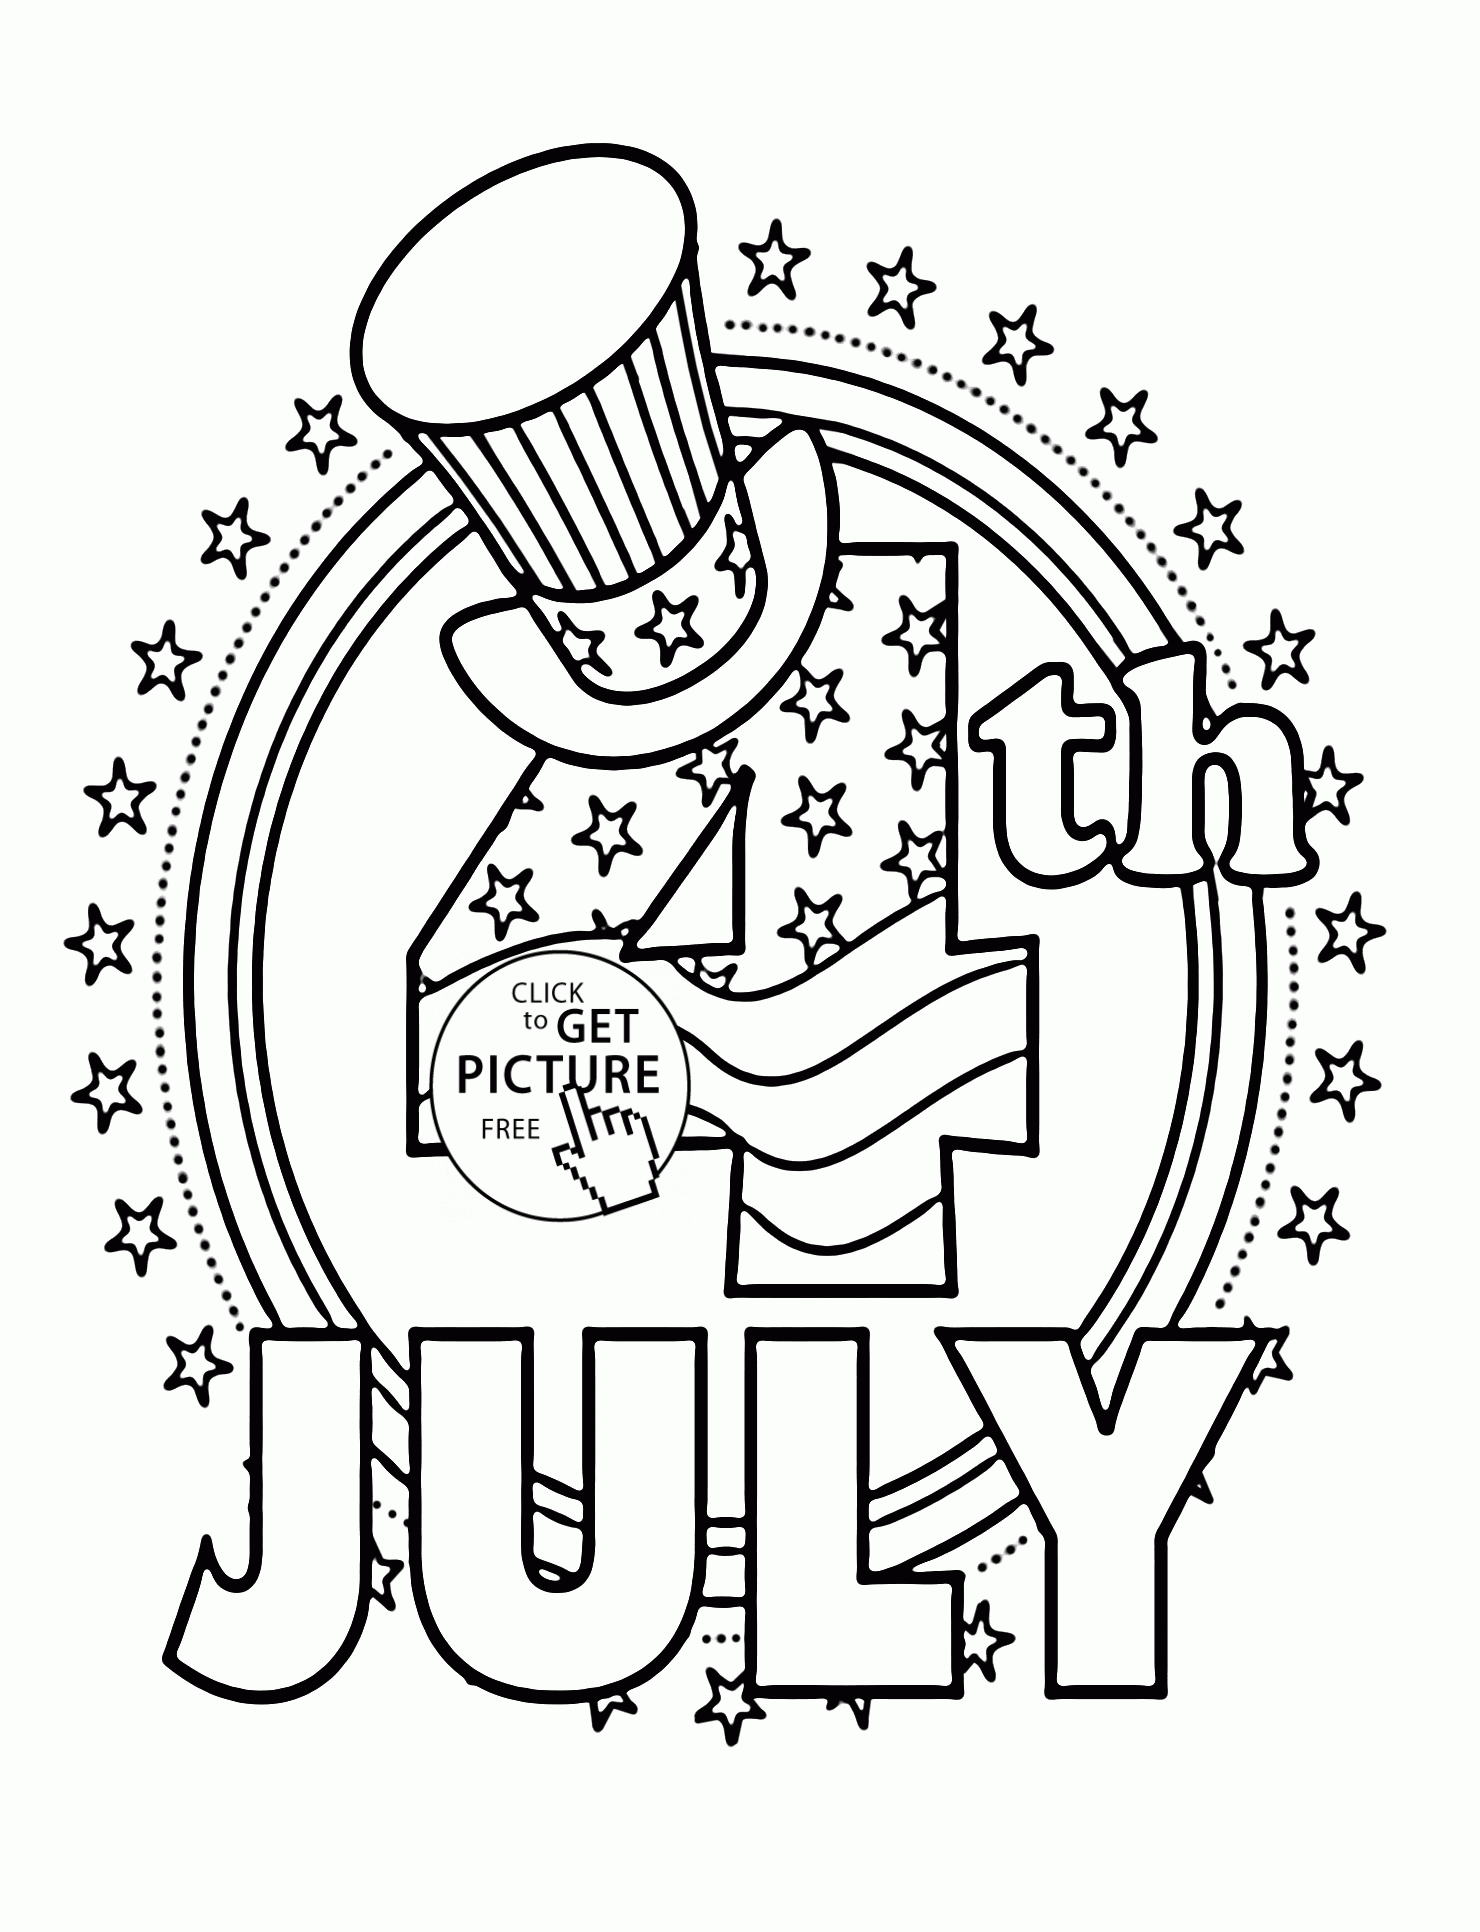 Coloring Pages : Printable 4Th Of July Coloring Pages Freer Kids - Free Printable 4Th Of July Coloring Pages